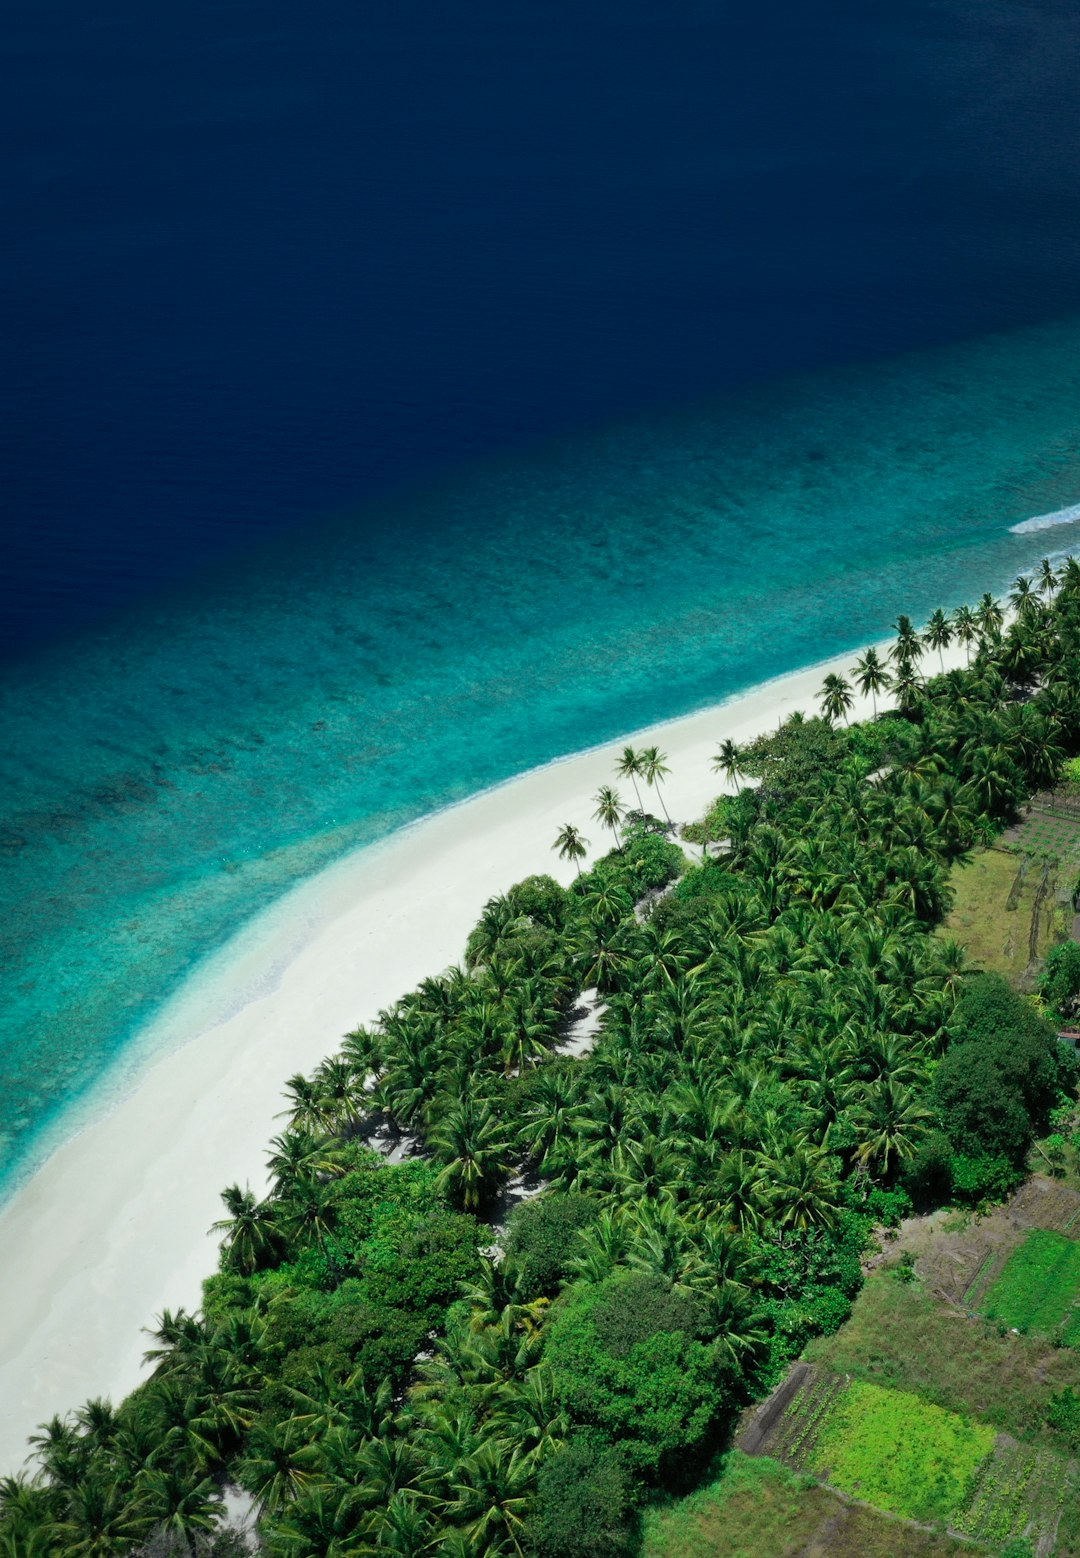 Travel Tips and Stories of Fuvahmulah in Maldives